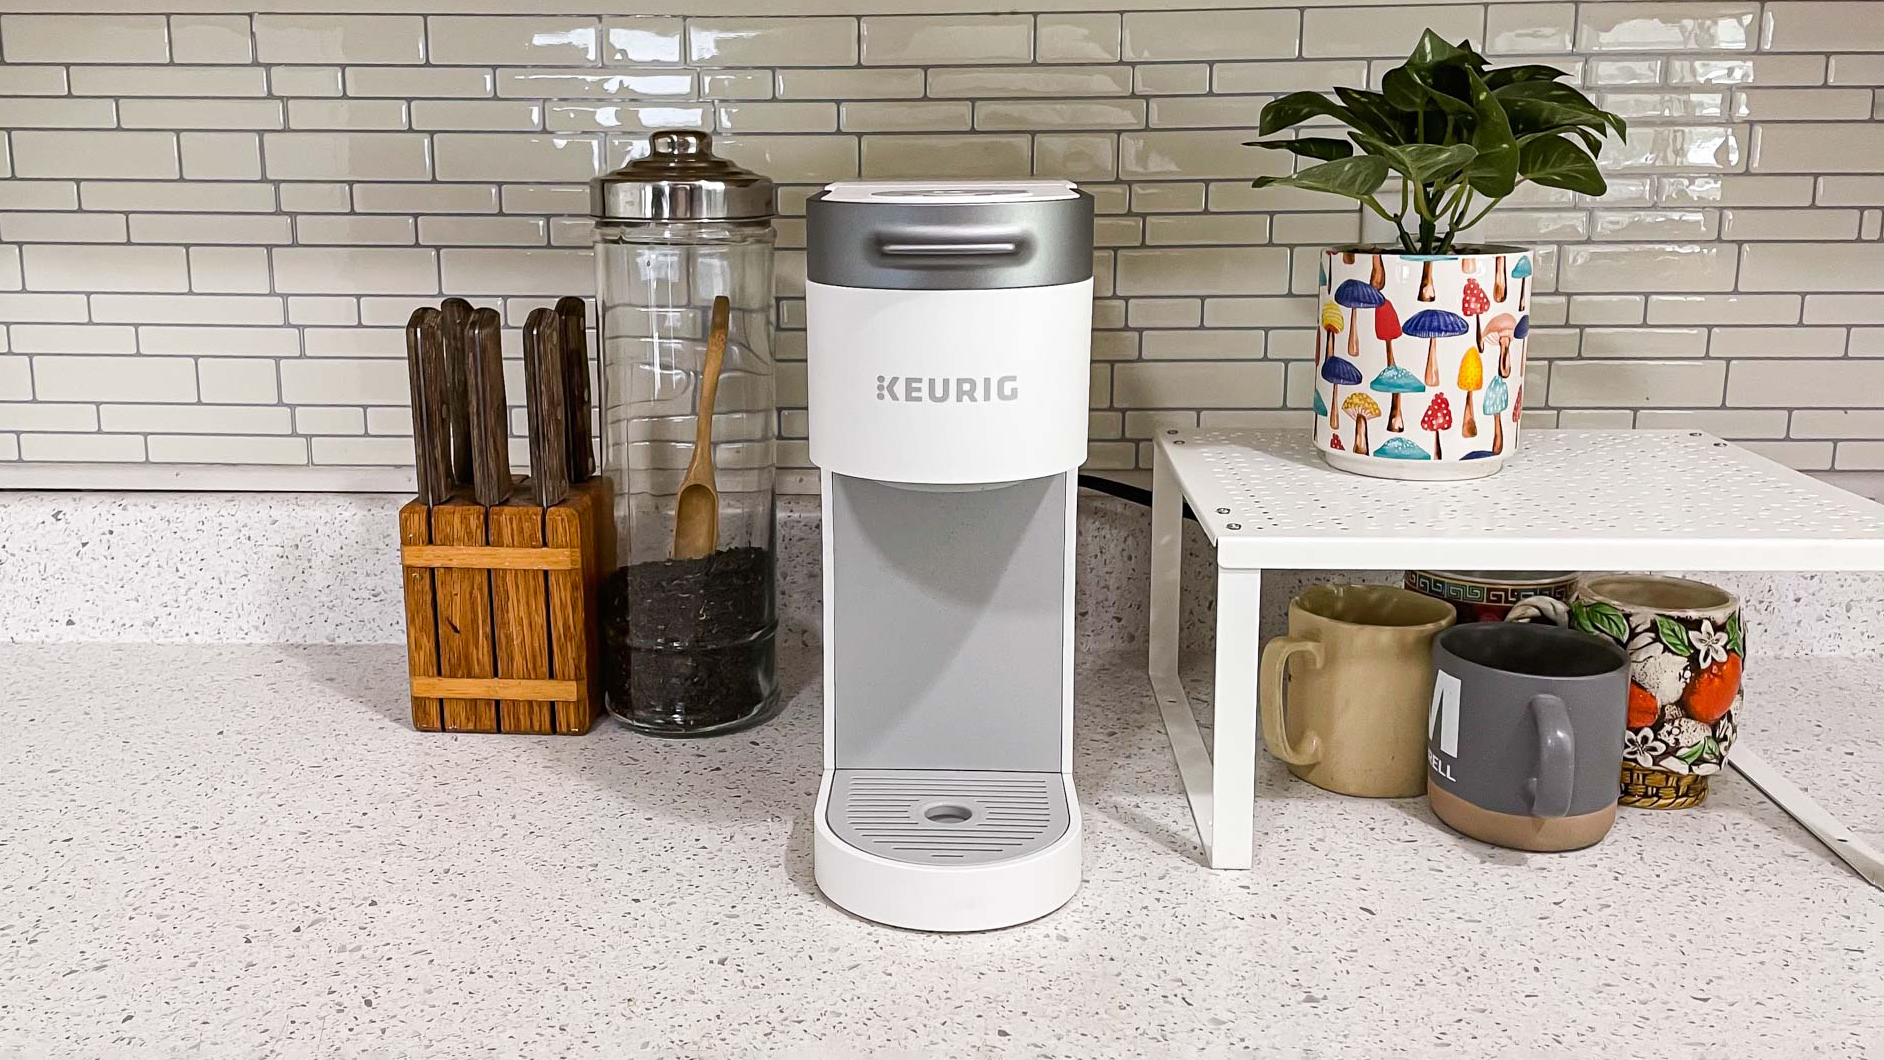 Keurig K-Slim Single Serve K-Cup Pod Coffee Maker, Featuring Simple Push Button Controls and MultiStream Technology, Twilight Blue